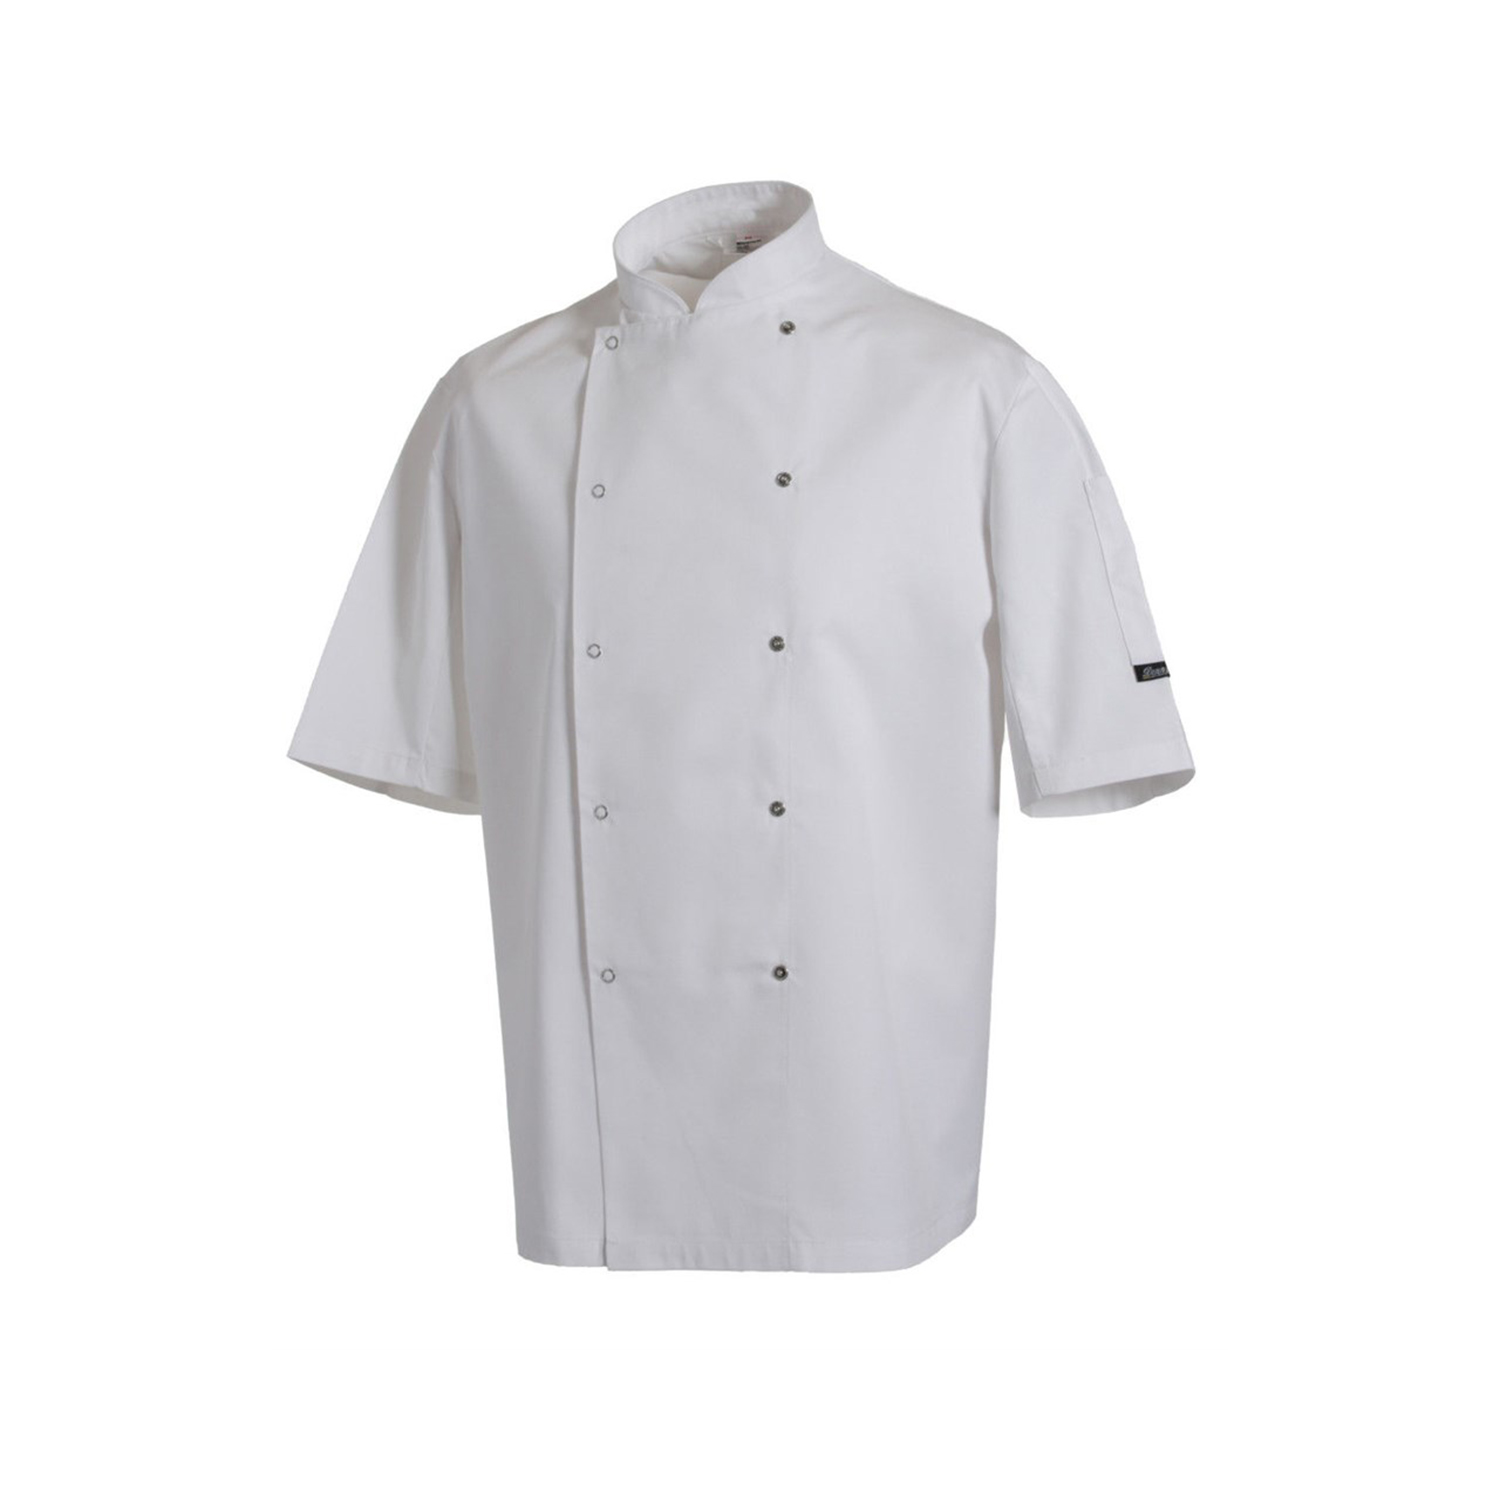 Dennys AFD Thermocool Uni Chef Jacket XS-4XL Black or White All Sizes in Stock